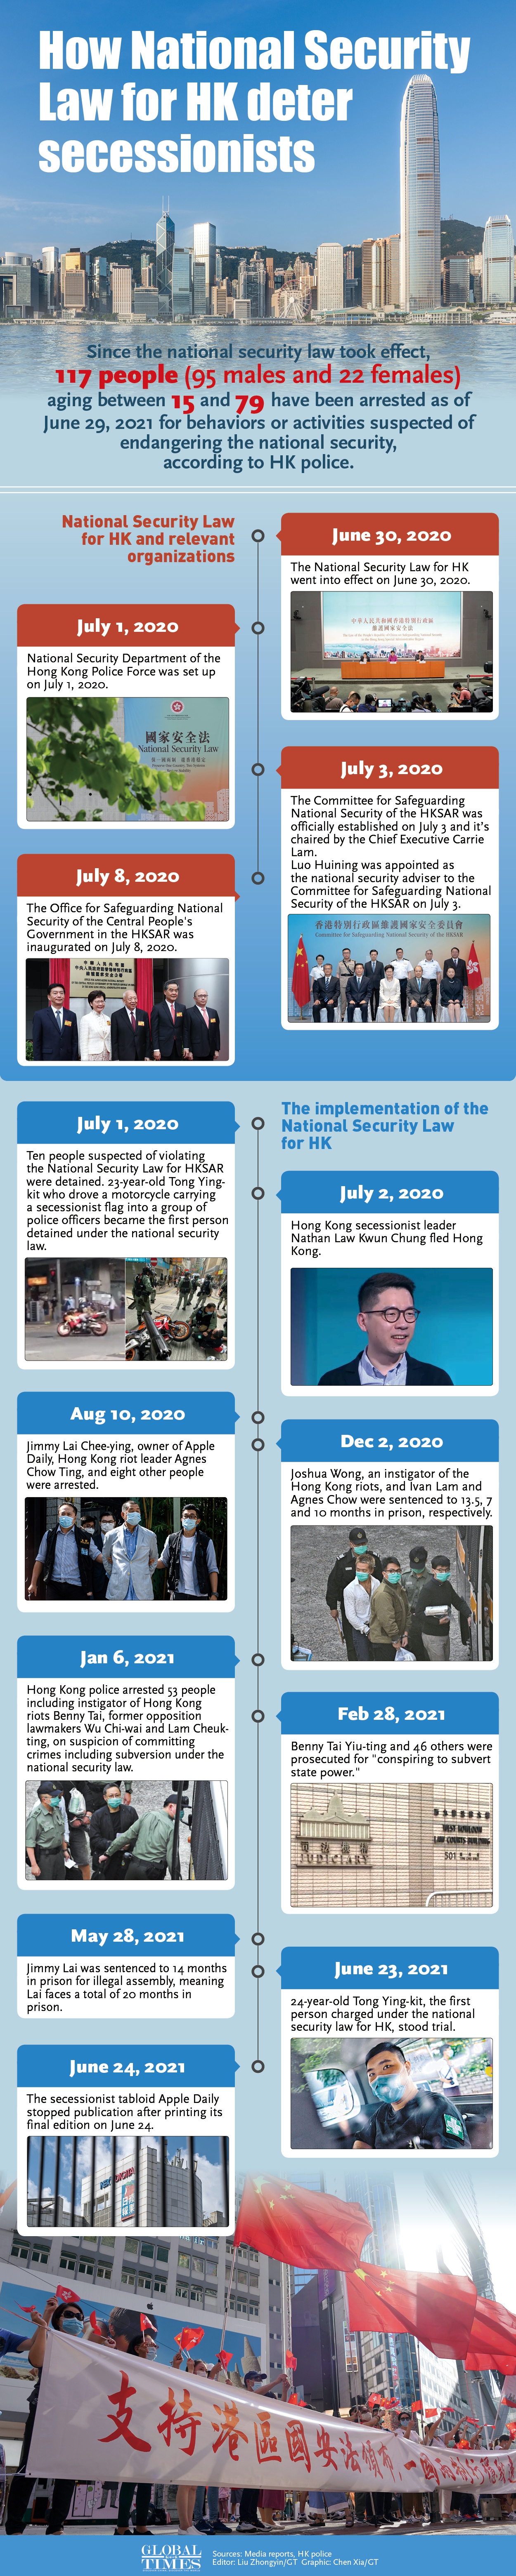 How National Security Law for HK deter secessionists infographic:Liu Zhongyin and Chen Xia